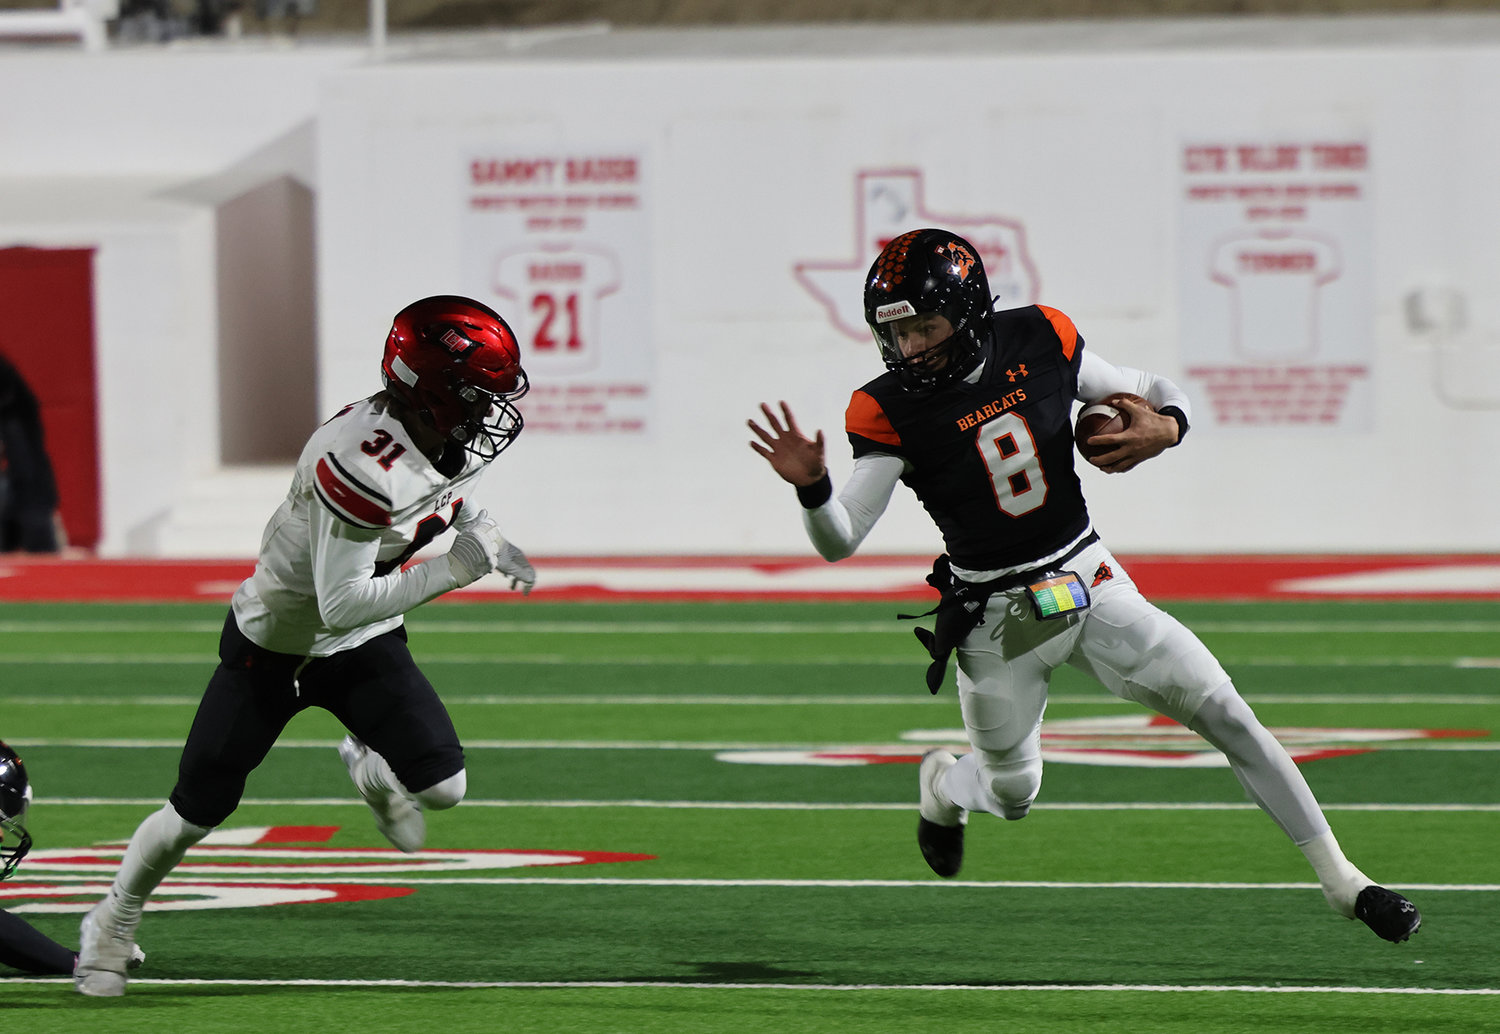 Aledo quarterback Hauss Hejny ran for 197 yards and two touchdowns against the Pirates.